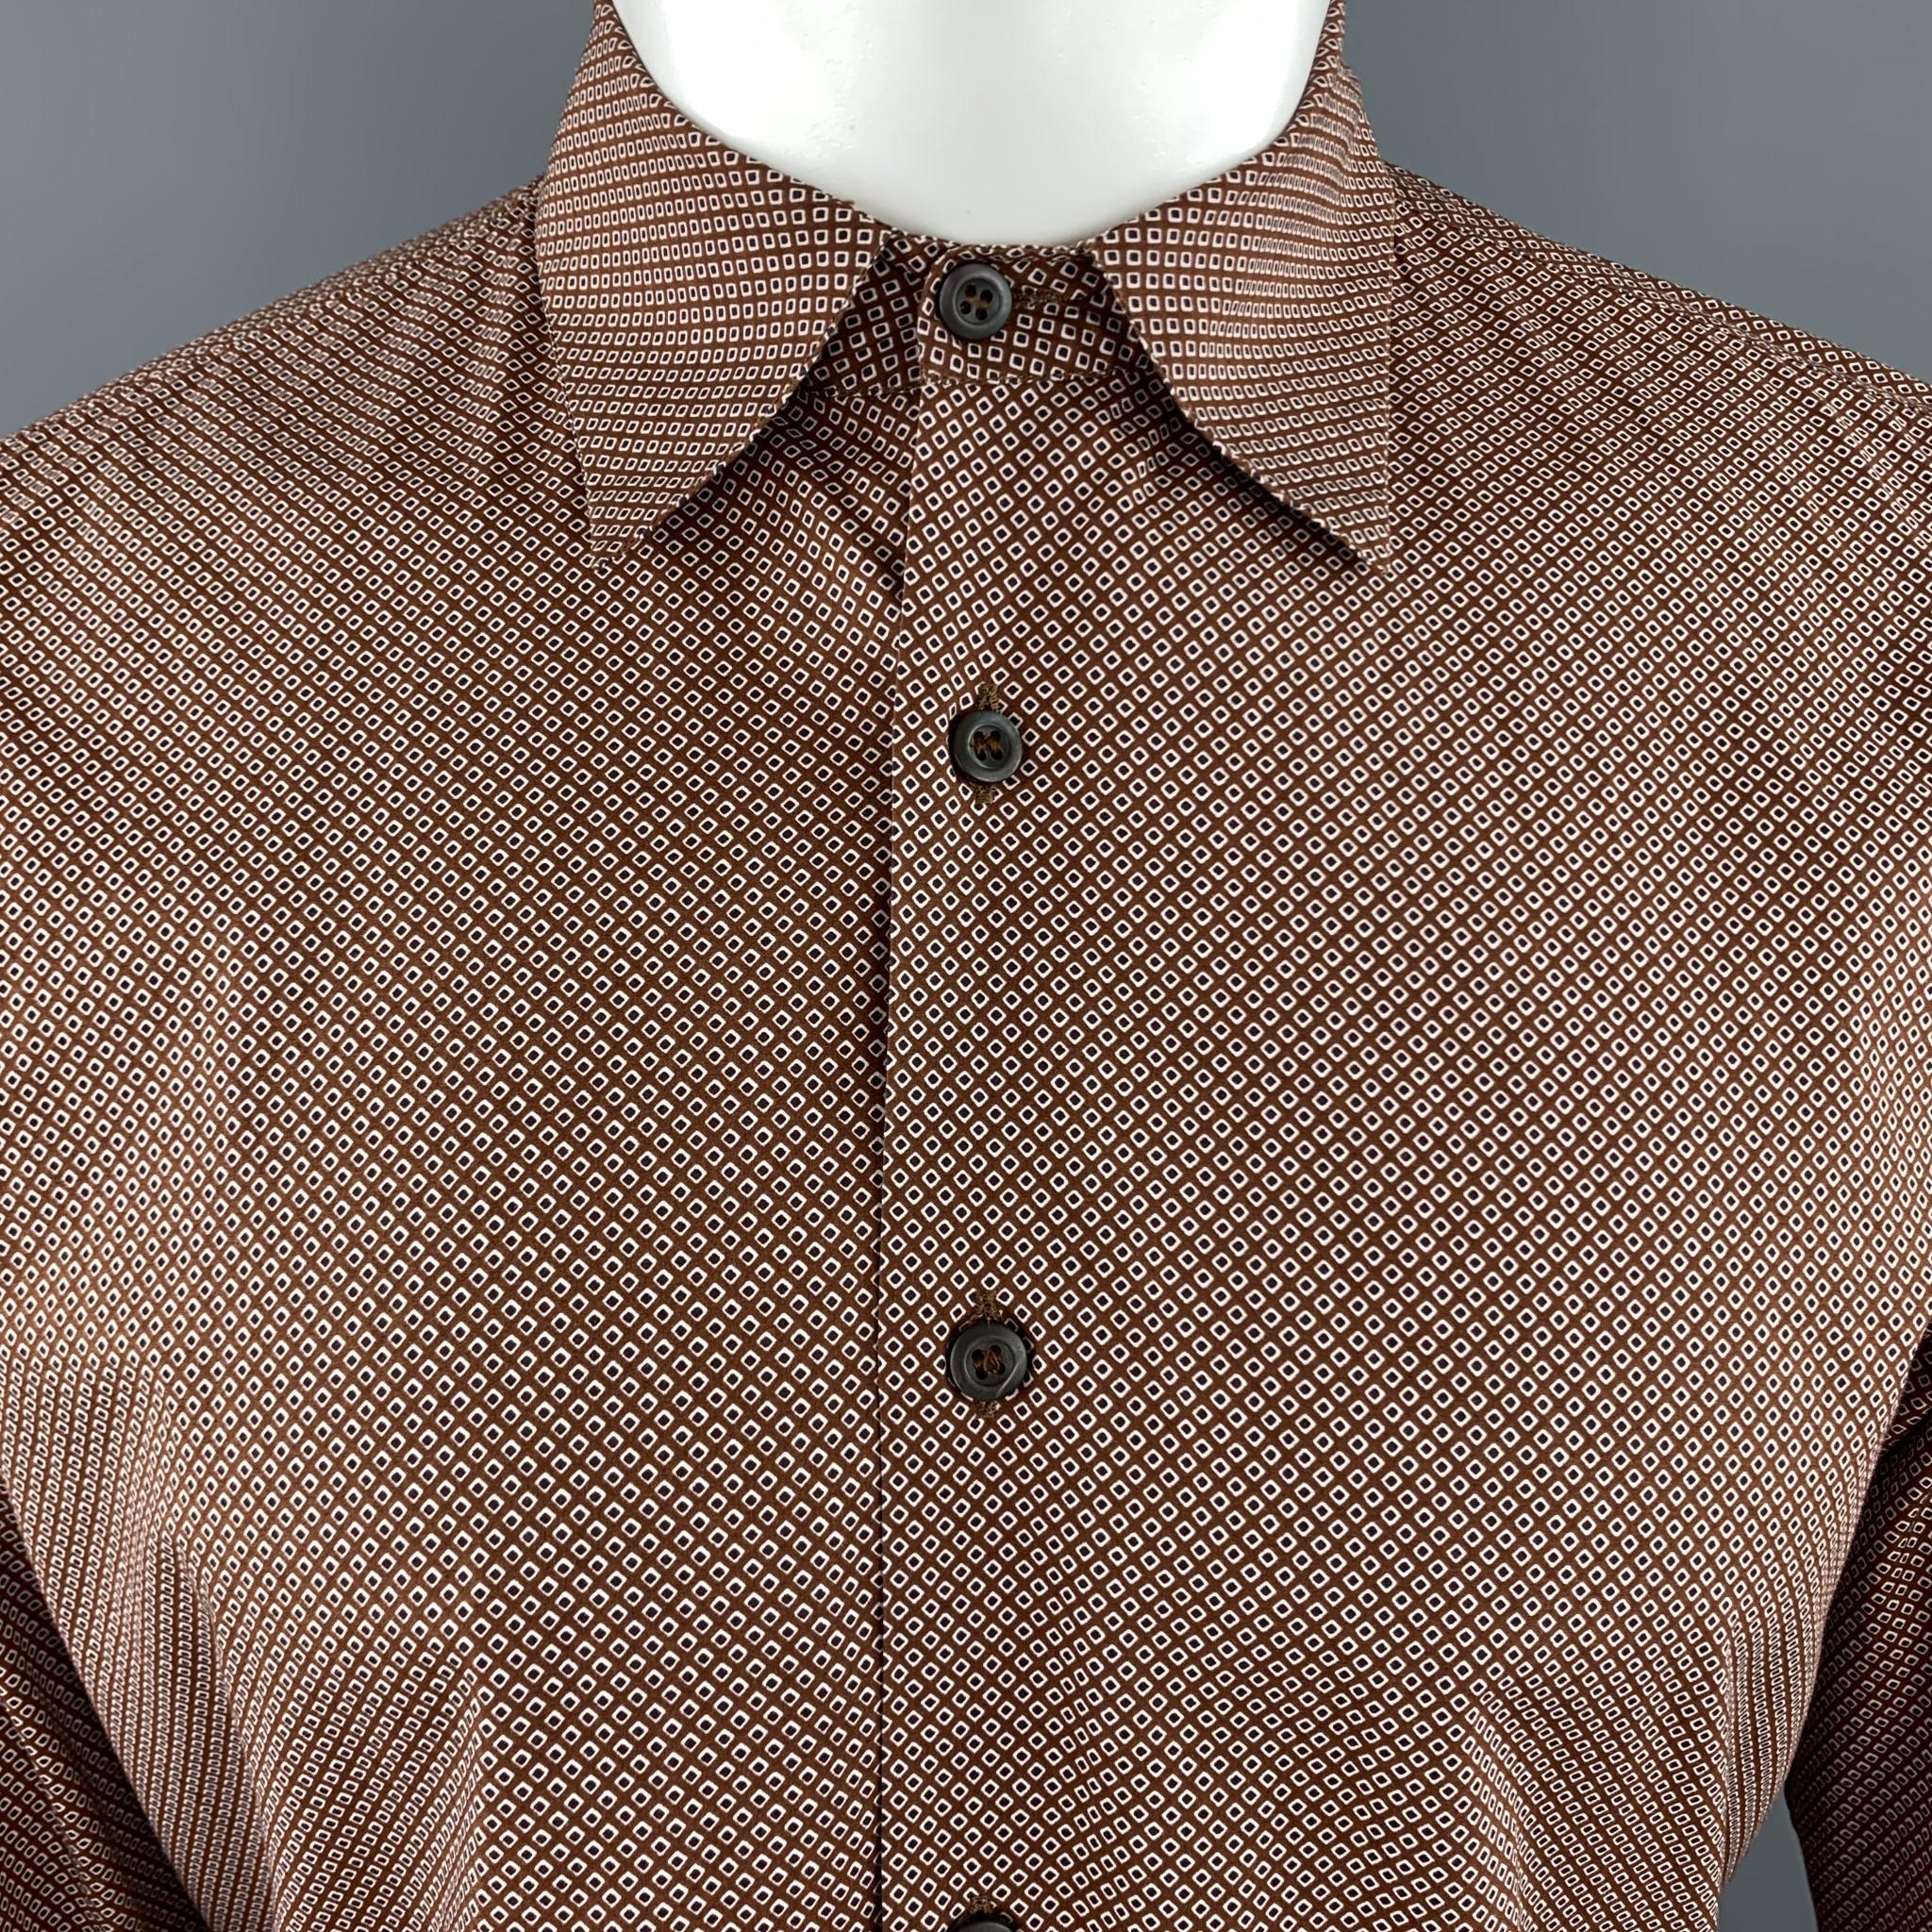 PRADA dress shirt comes in brown cotton with an all over white and navy retro dot print . Made in Italy.

Excellent Pre-Owned Condition.
Marked: US 40 / 15 3/4

Measurements:

Shoulder: 17 in.
Chest: 44 n.
Sleeve: 26 in.
Length: 30.5 in.